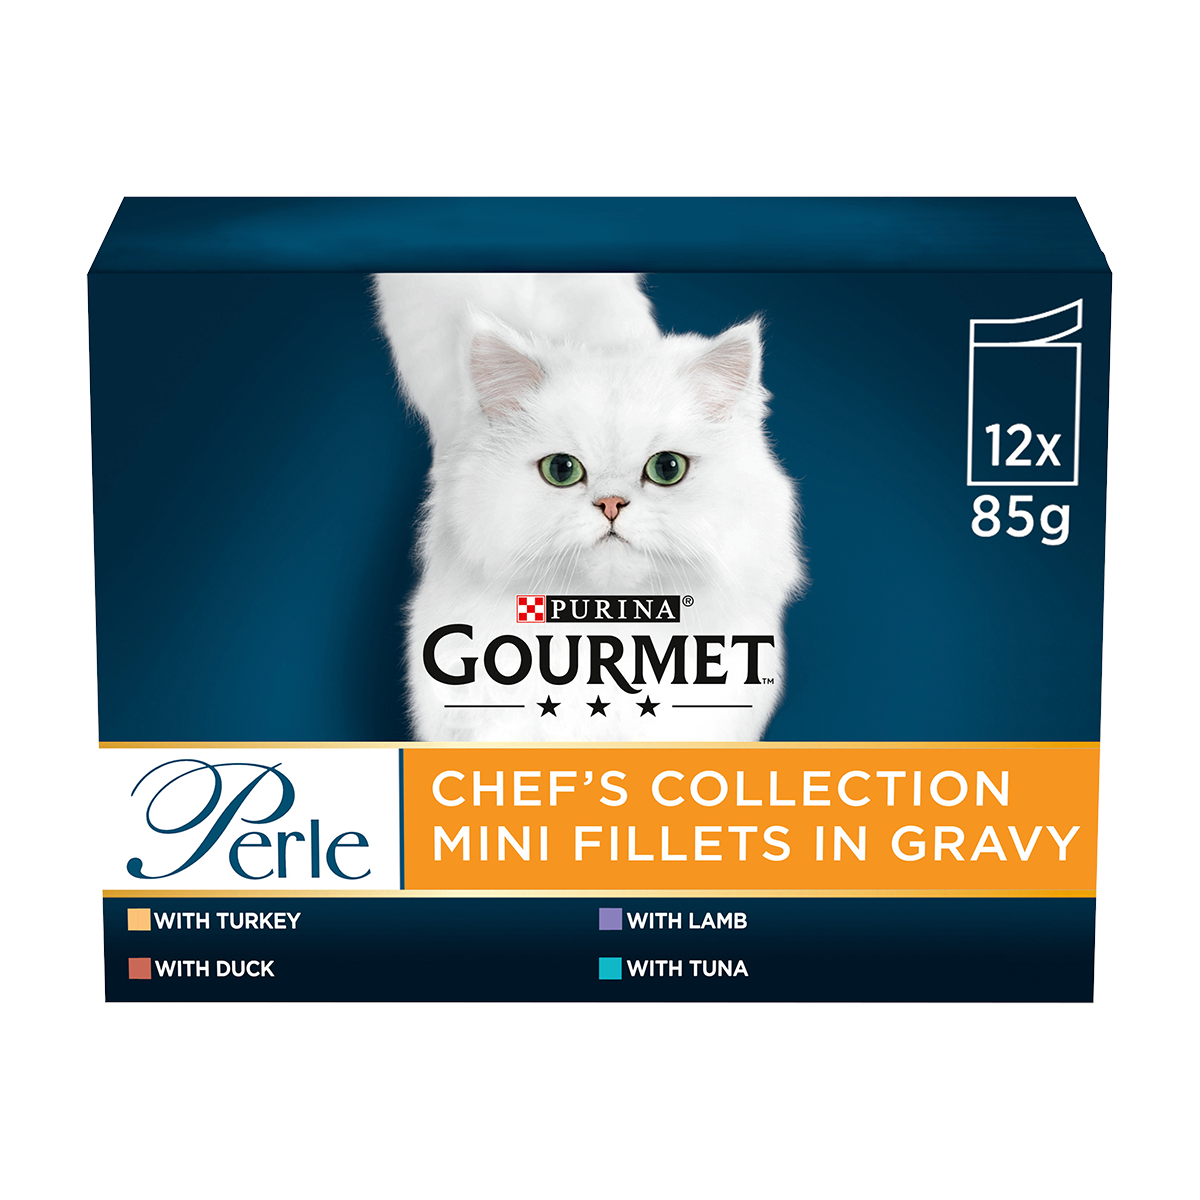 Purina Gourmet Perle - Chefs Collection